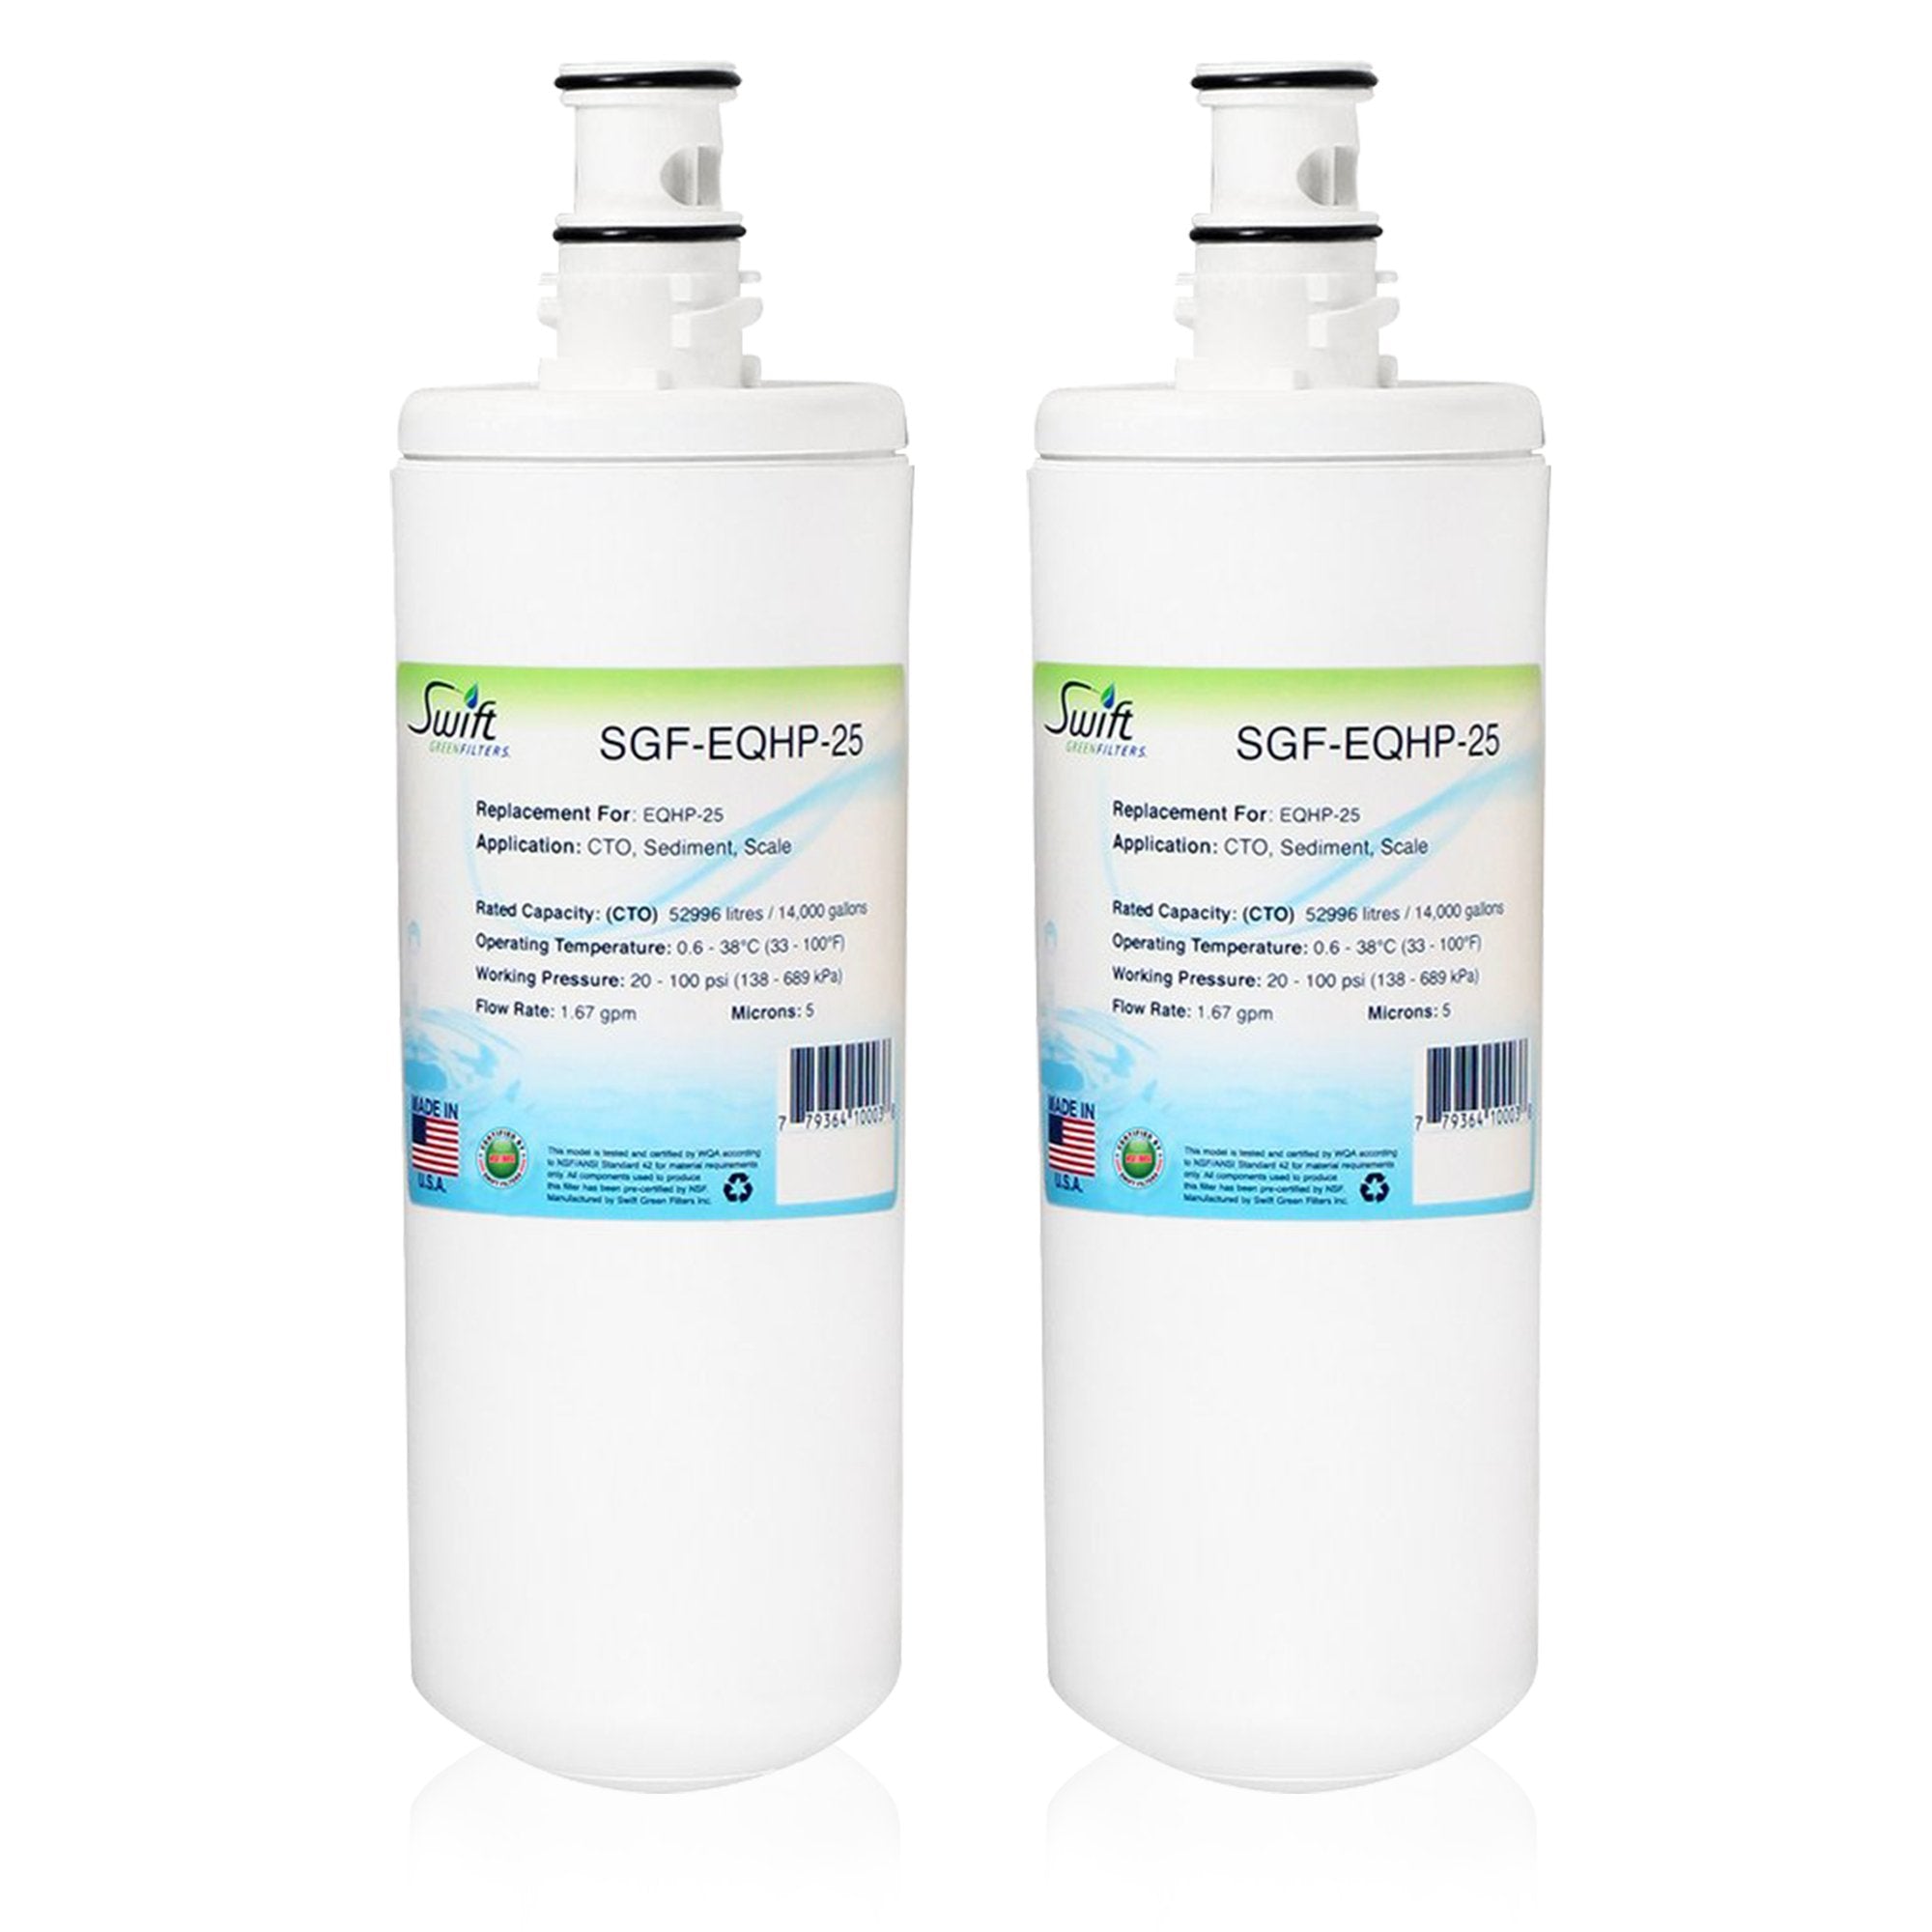 Replacement for Bunn Bunn EQHP-25 Water Filter by Swift Green Filters SGF-EQHP-25